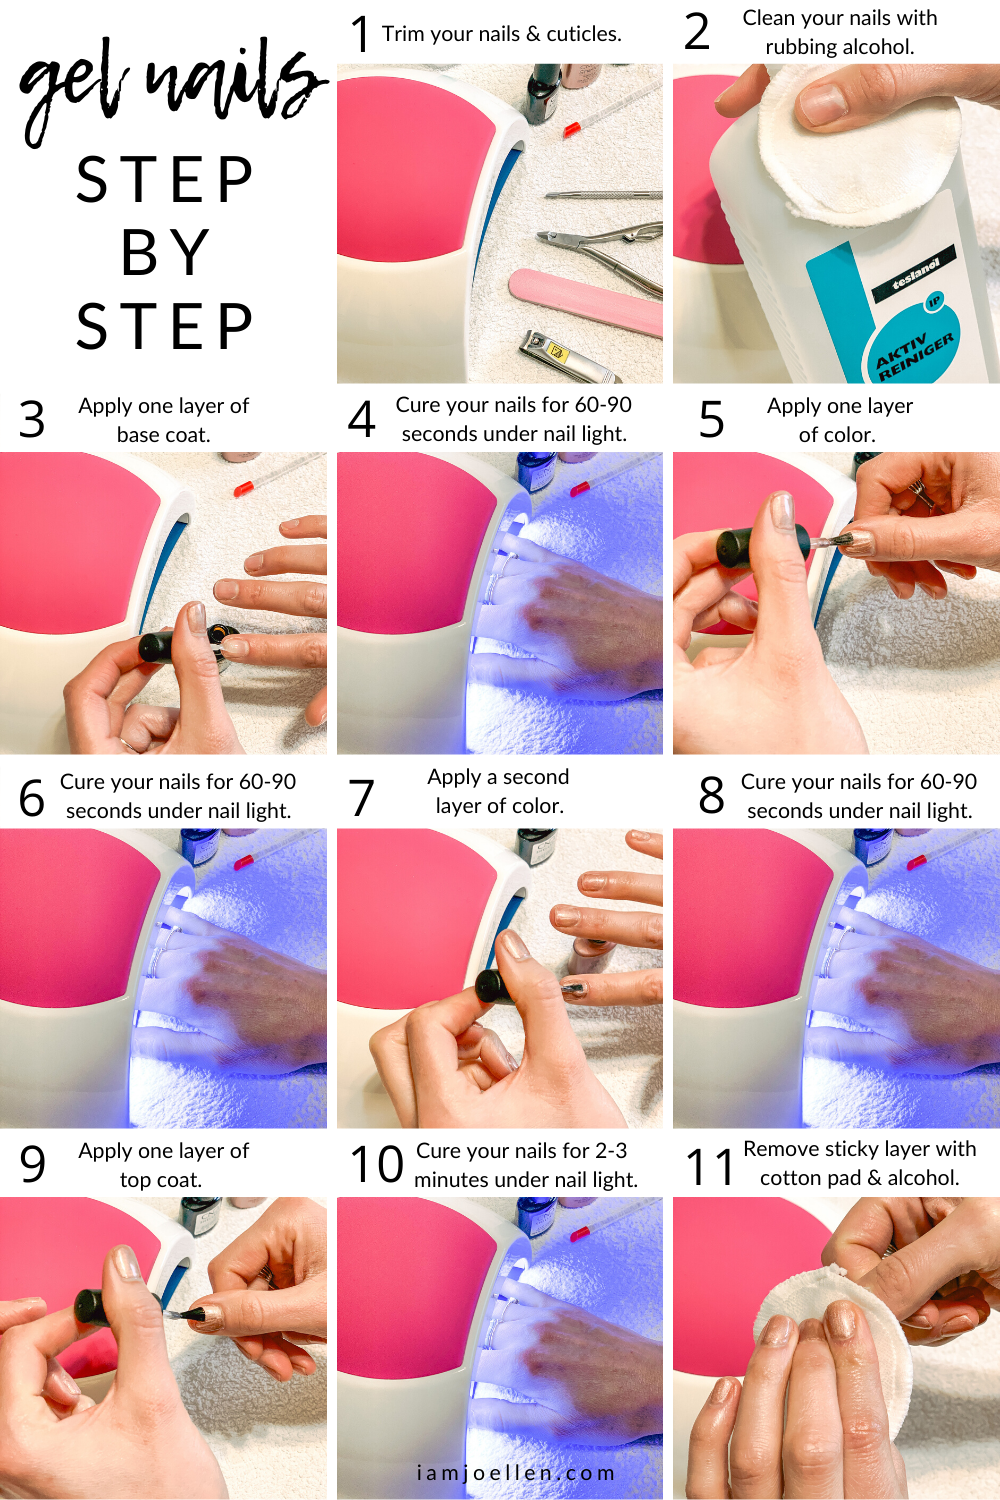 How to Do Gel Nails at Home